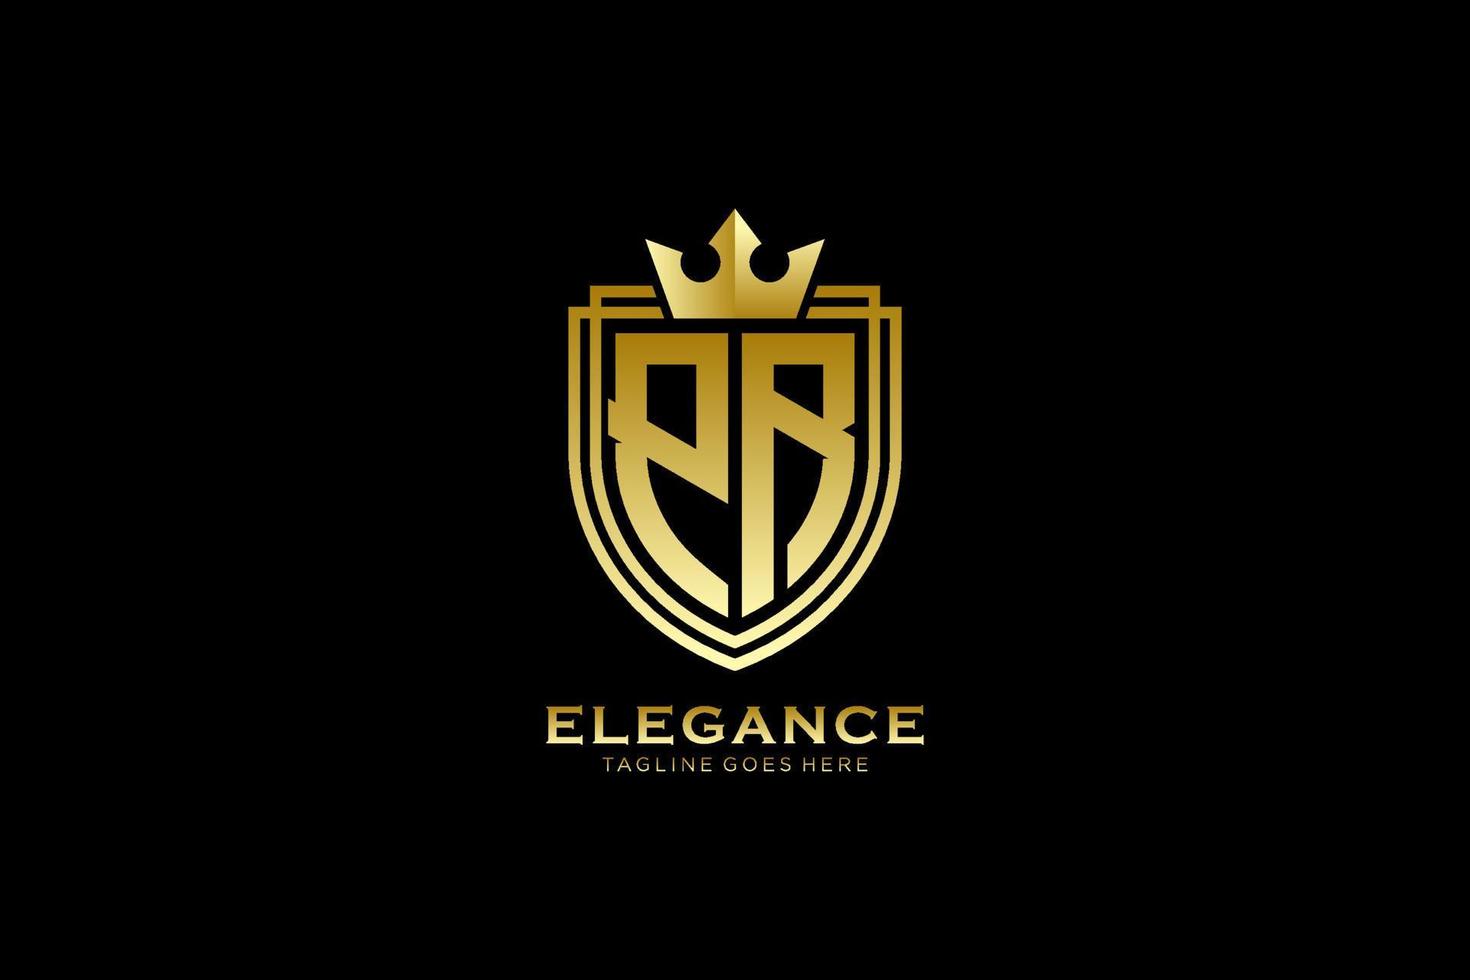 initial PR elegant luxury monogram logo or badge template with scrolls and royal crown - perfect for luxurious branding projects vector